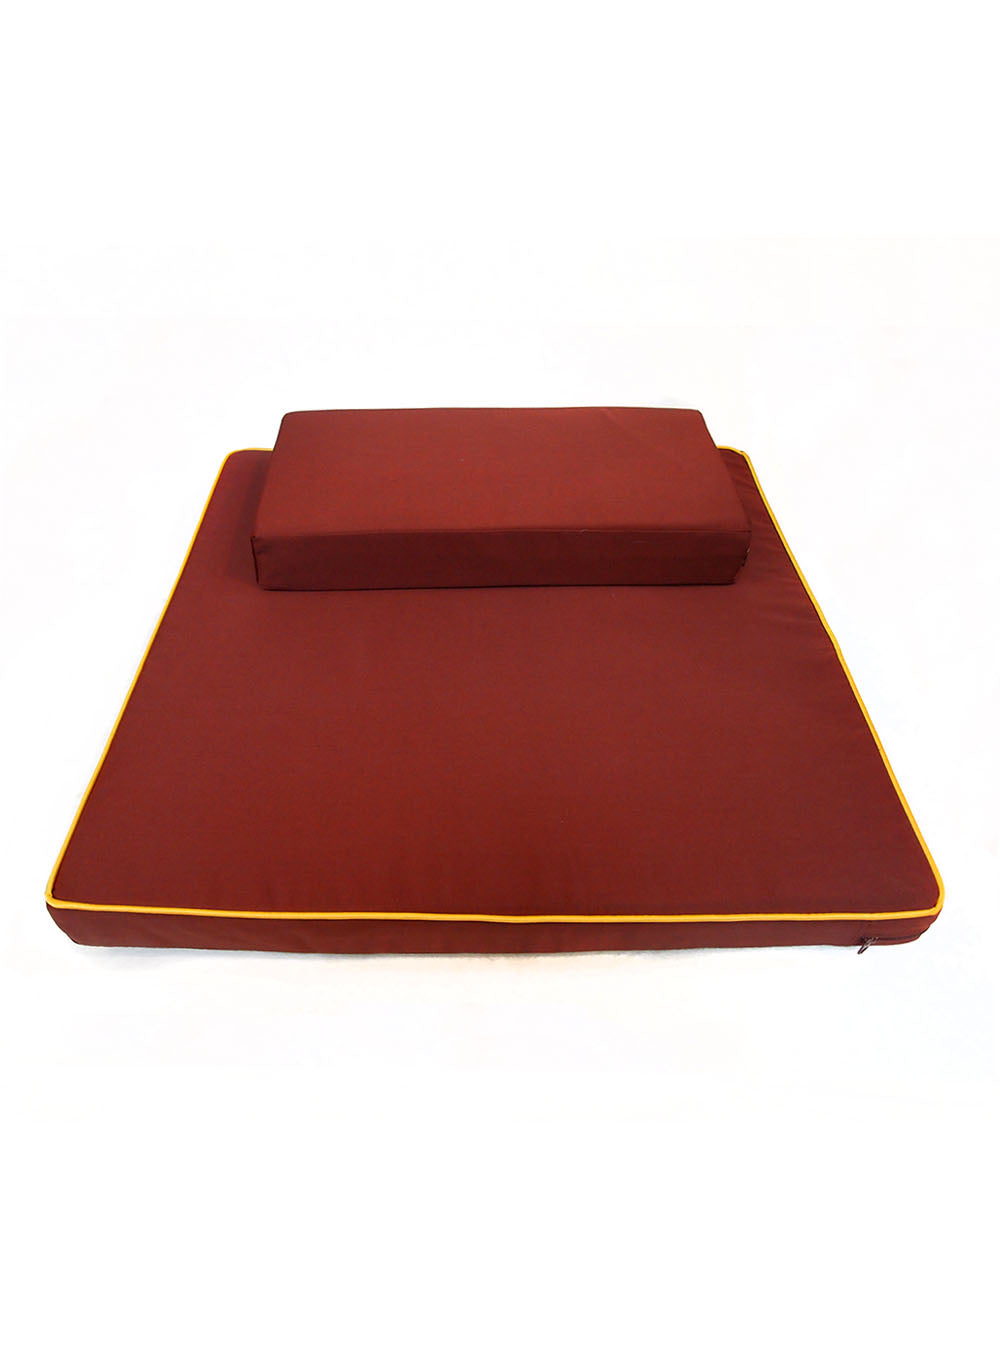 
					2-Pieces Large Meditation Cushion in Reddish Brown				